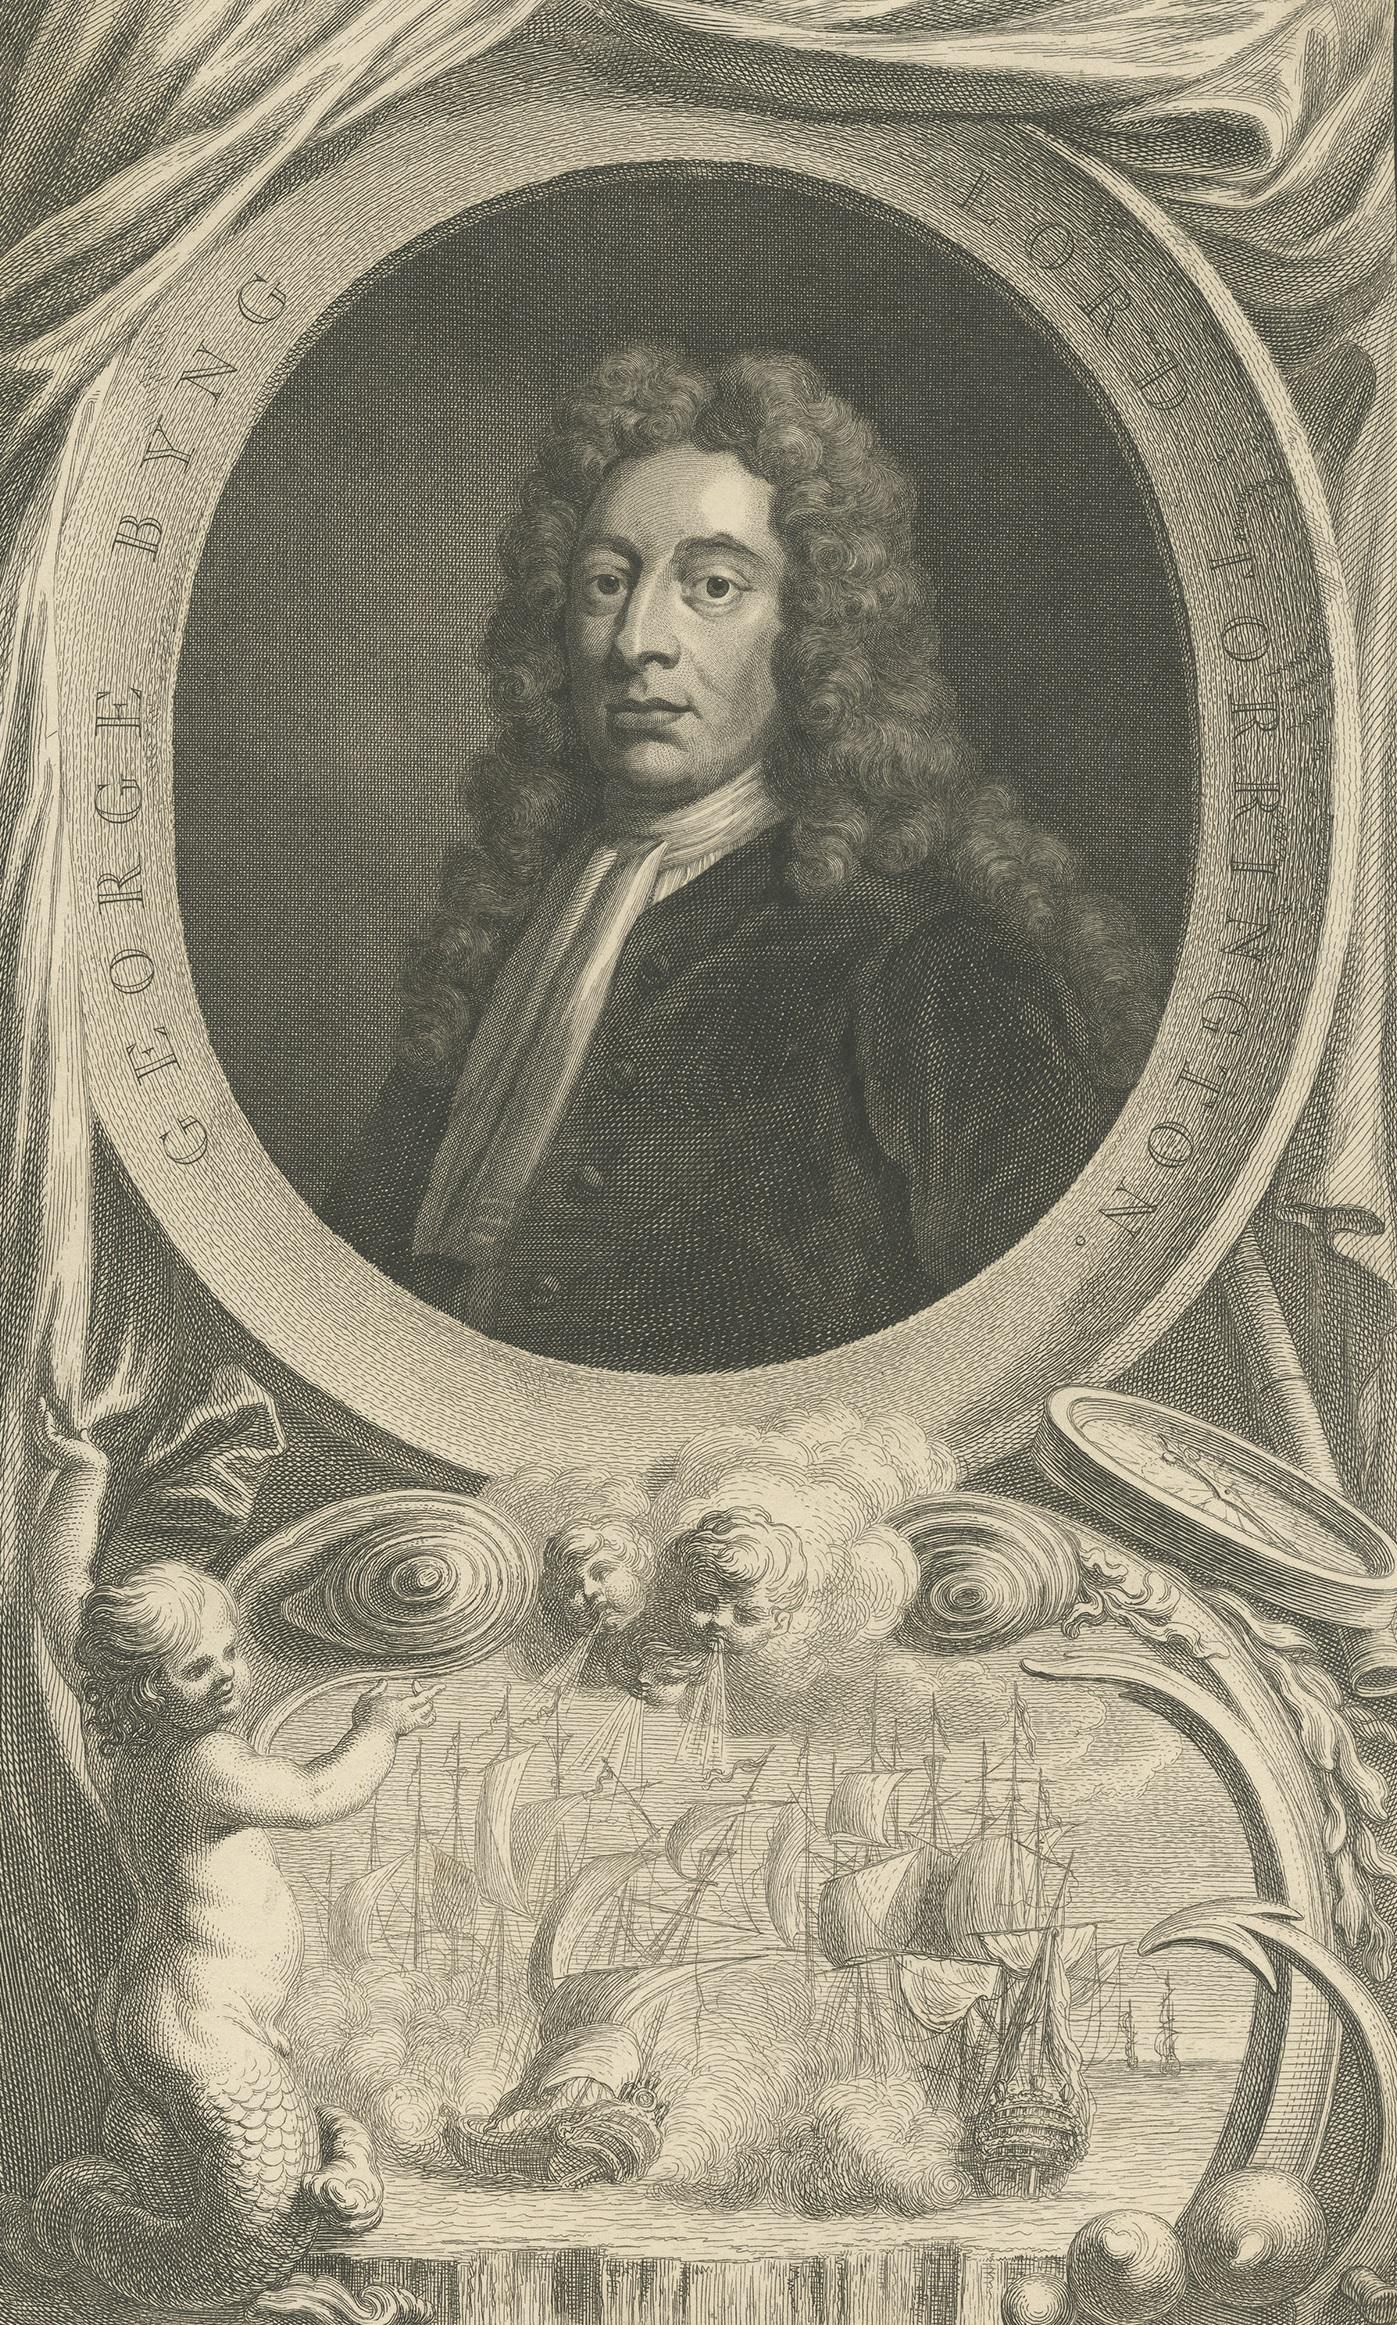 Antique print titled 'George Byng, Lord Torrington'. Portrait of George Byng, Lord Tottington, in oval surround with battle scene below. In the collection of the Right Hon The Lord Viscount Torrington. Painted by Kneller, engraved by Houbraken,